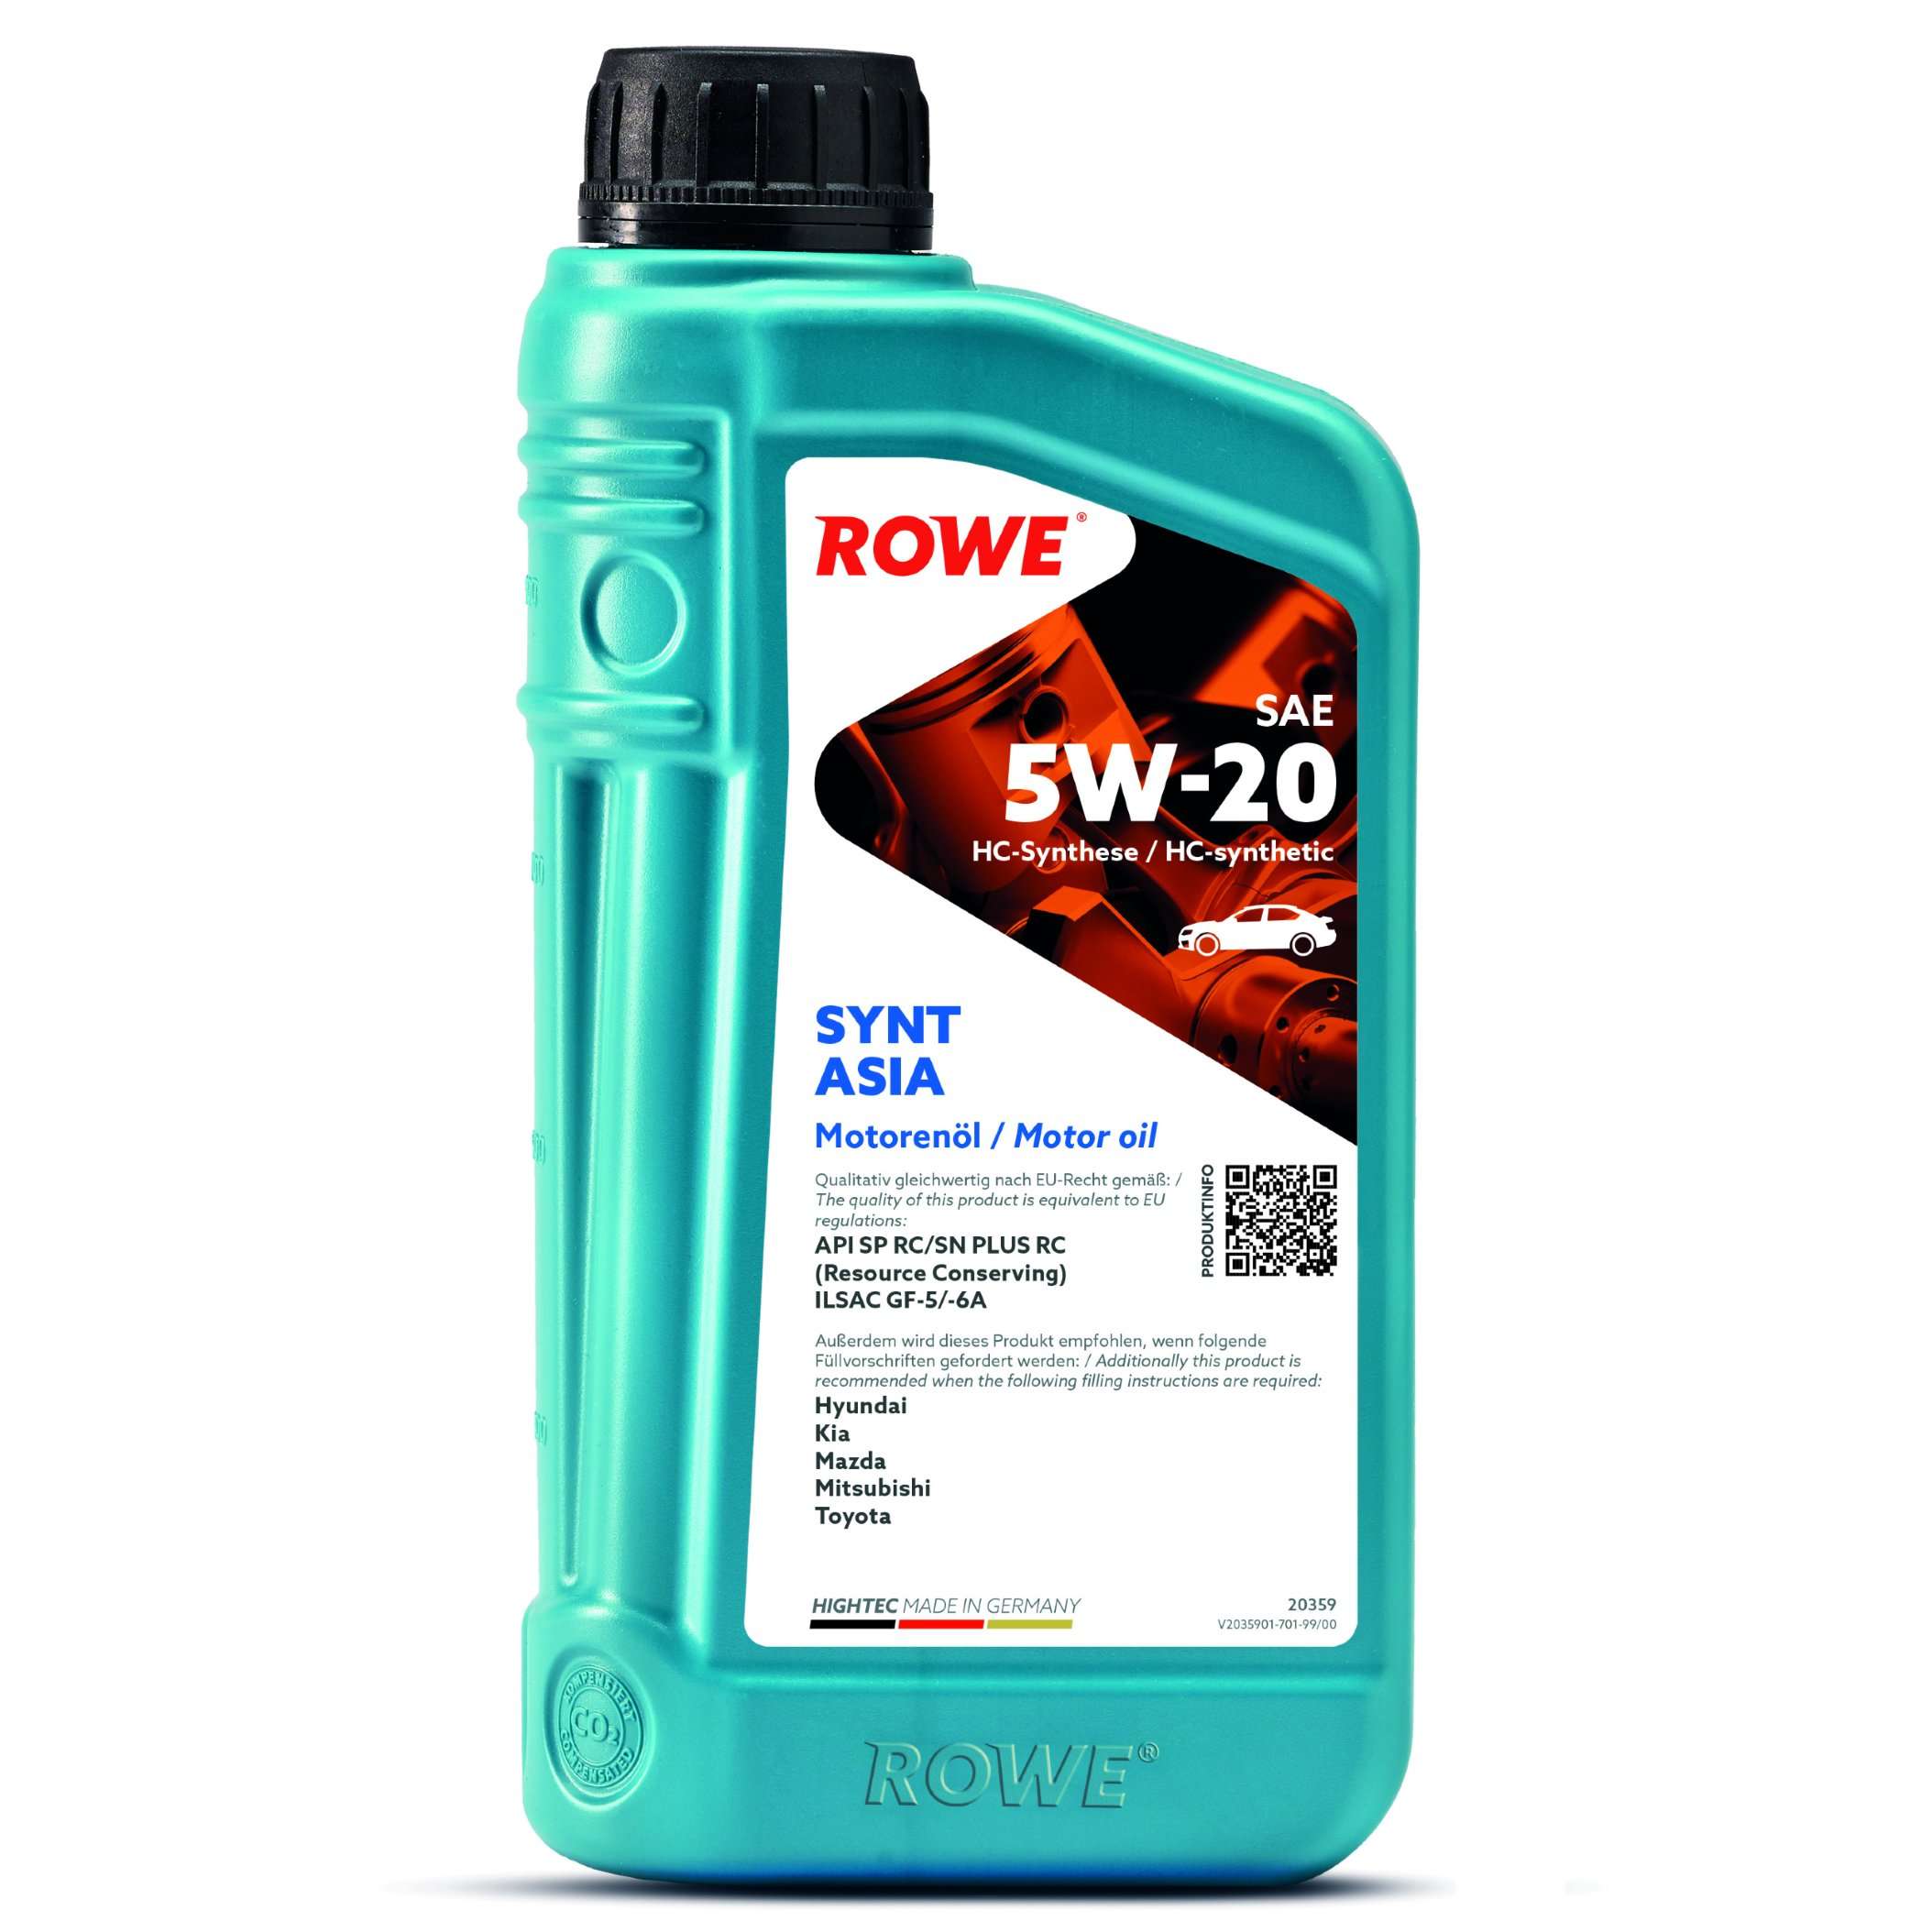 Моторное масло ROWE Synt Asia 5W-20 1 л, 20359-0010-99